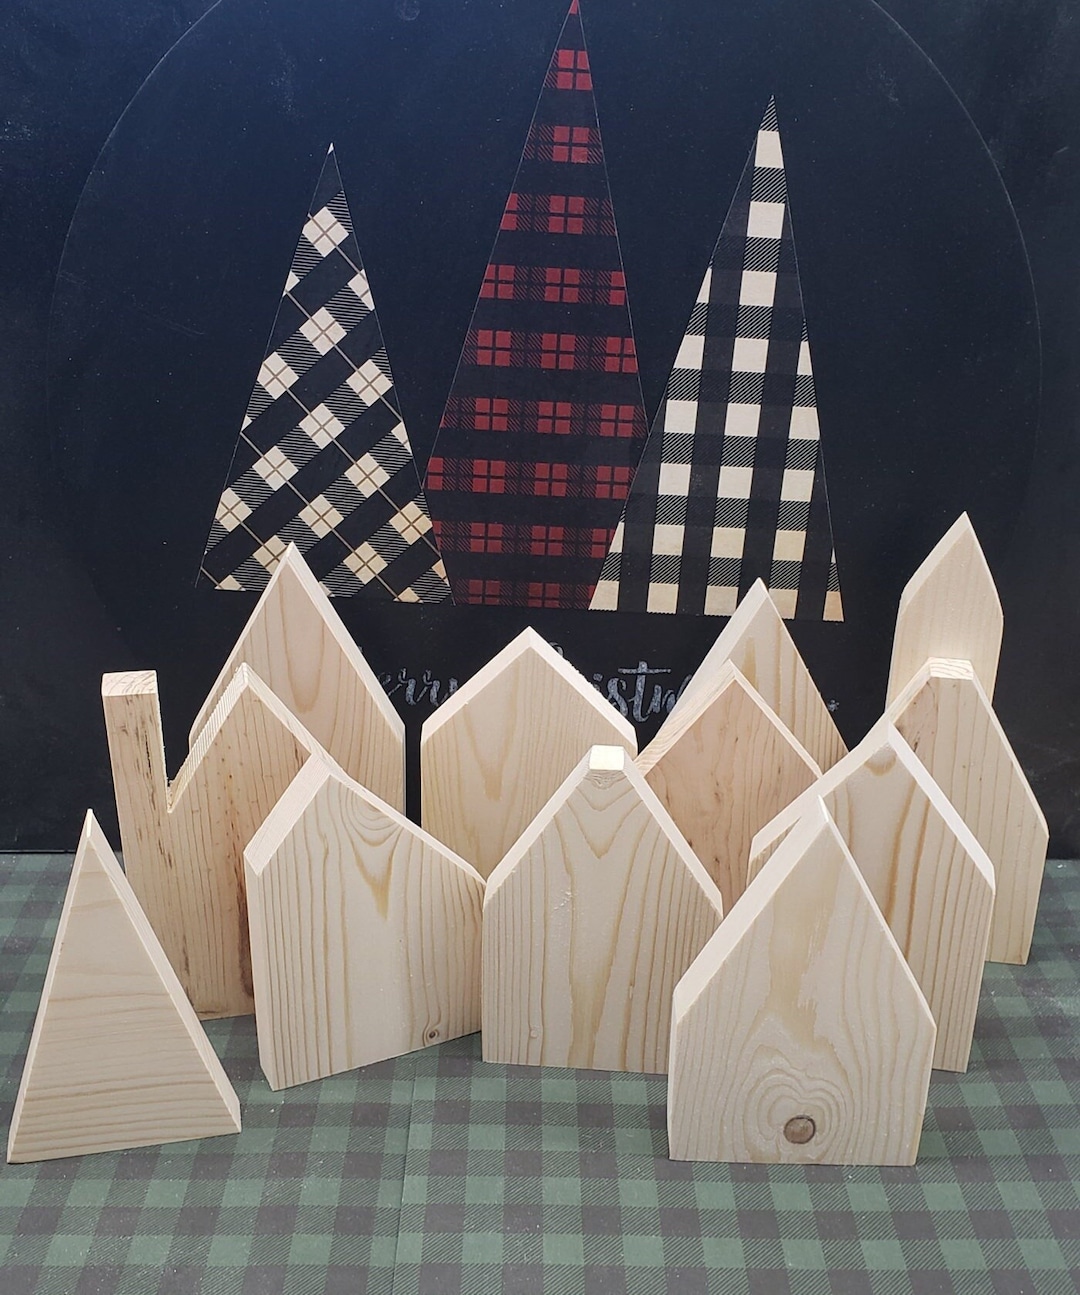 Set of 6 Wooden Houses. Unfinished Wood House. for Crafts Painting  Coloring. Uncolored, Unpainted Supplies 